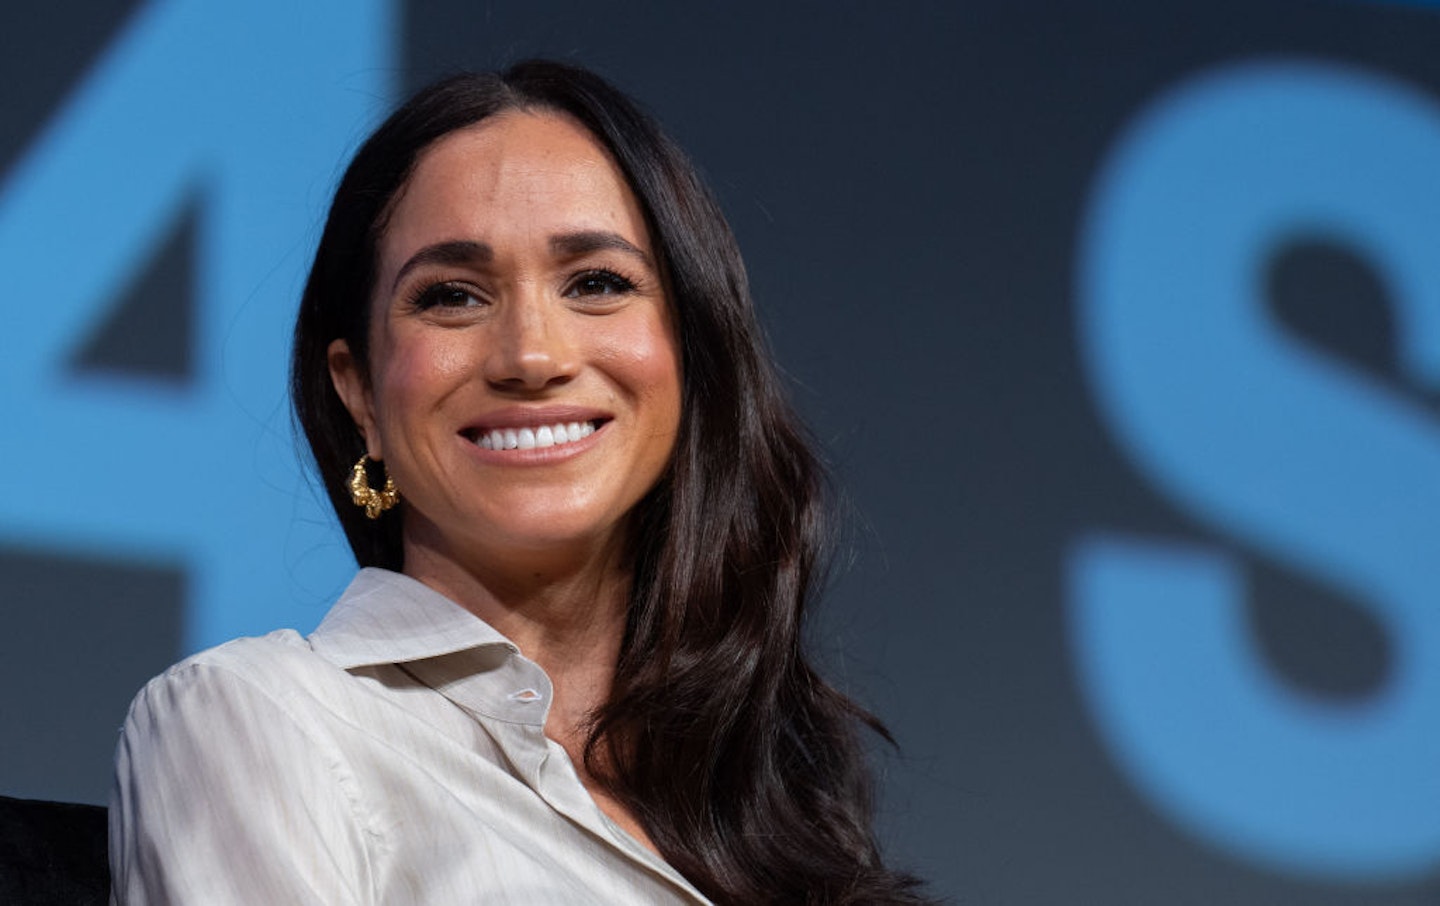 Meghan Markle at SXSW in Texas in March